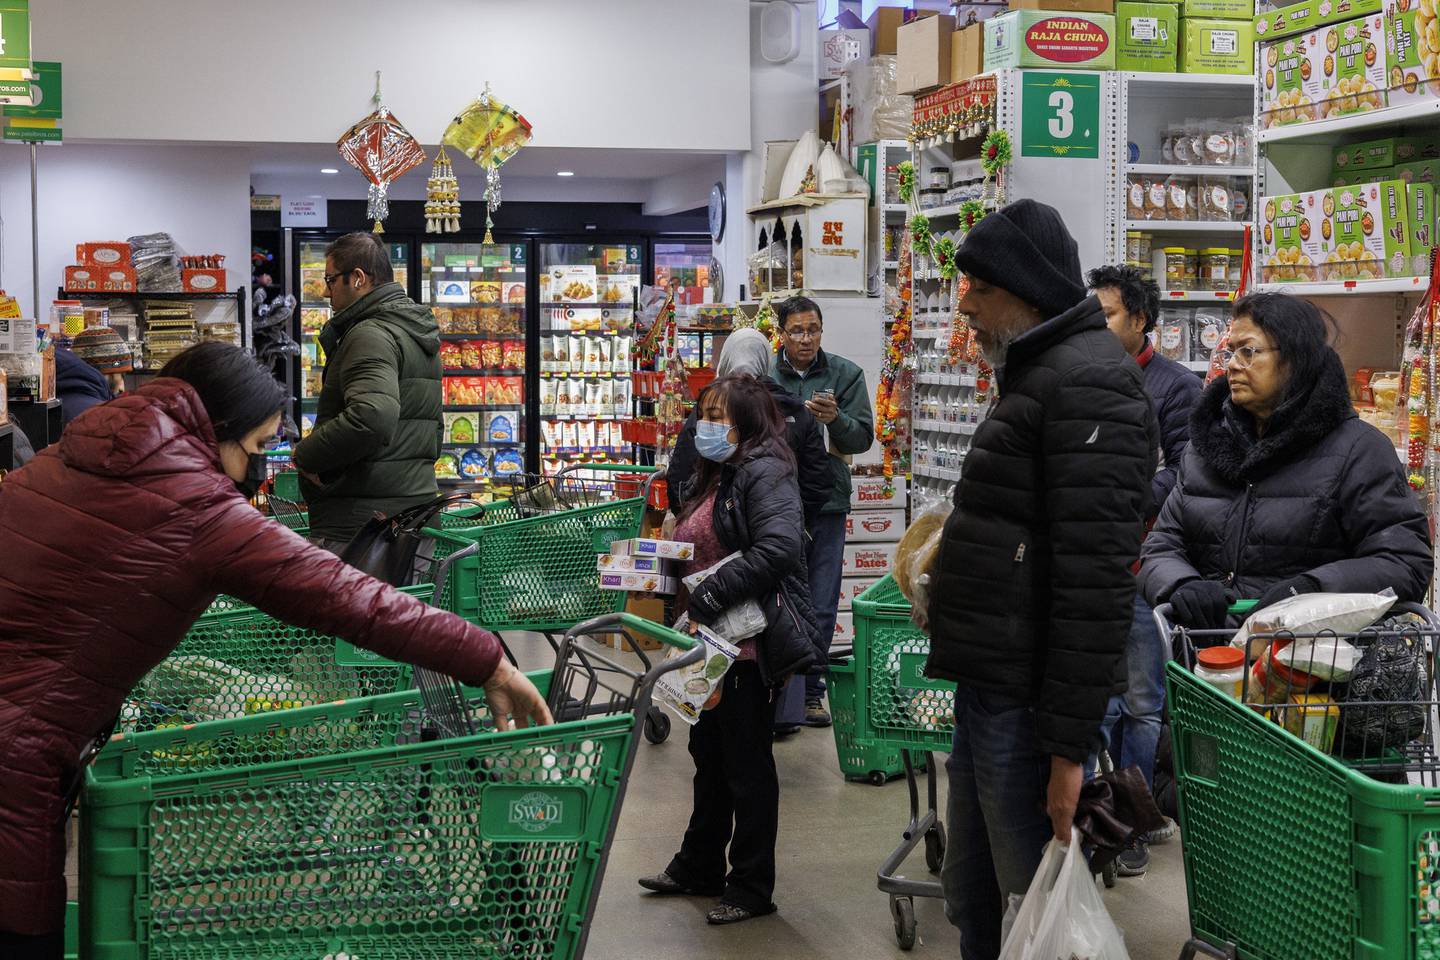 Shoppers wait to check out at Patel Brothers grocery store the day before a winter storm is expected to pass through the area on Dec. 21, 2022 in Chicago.